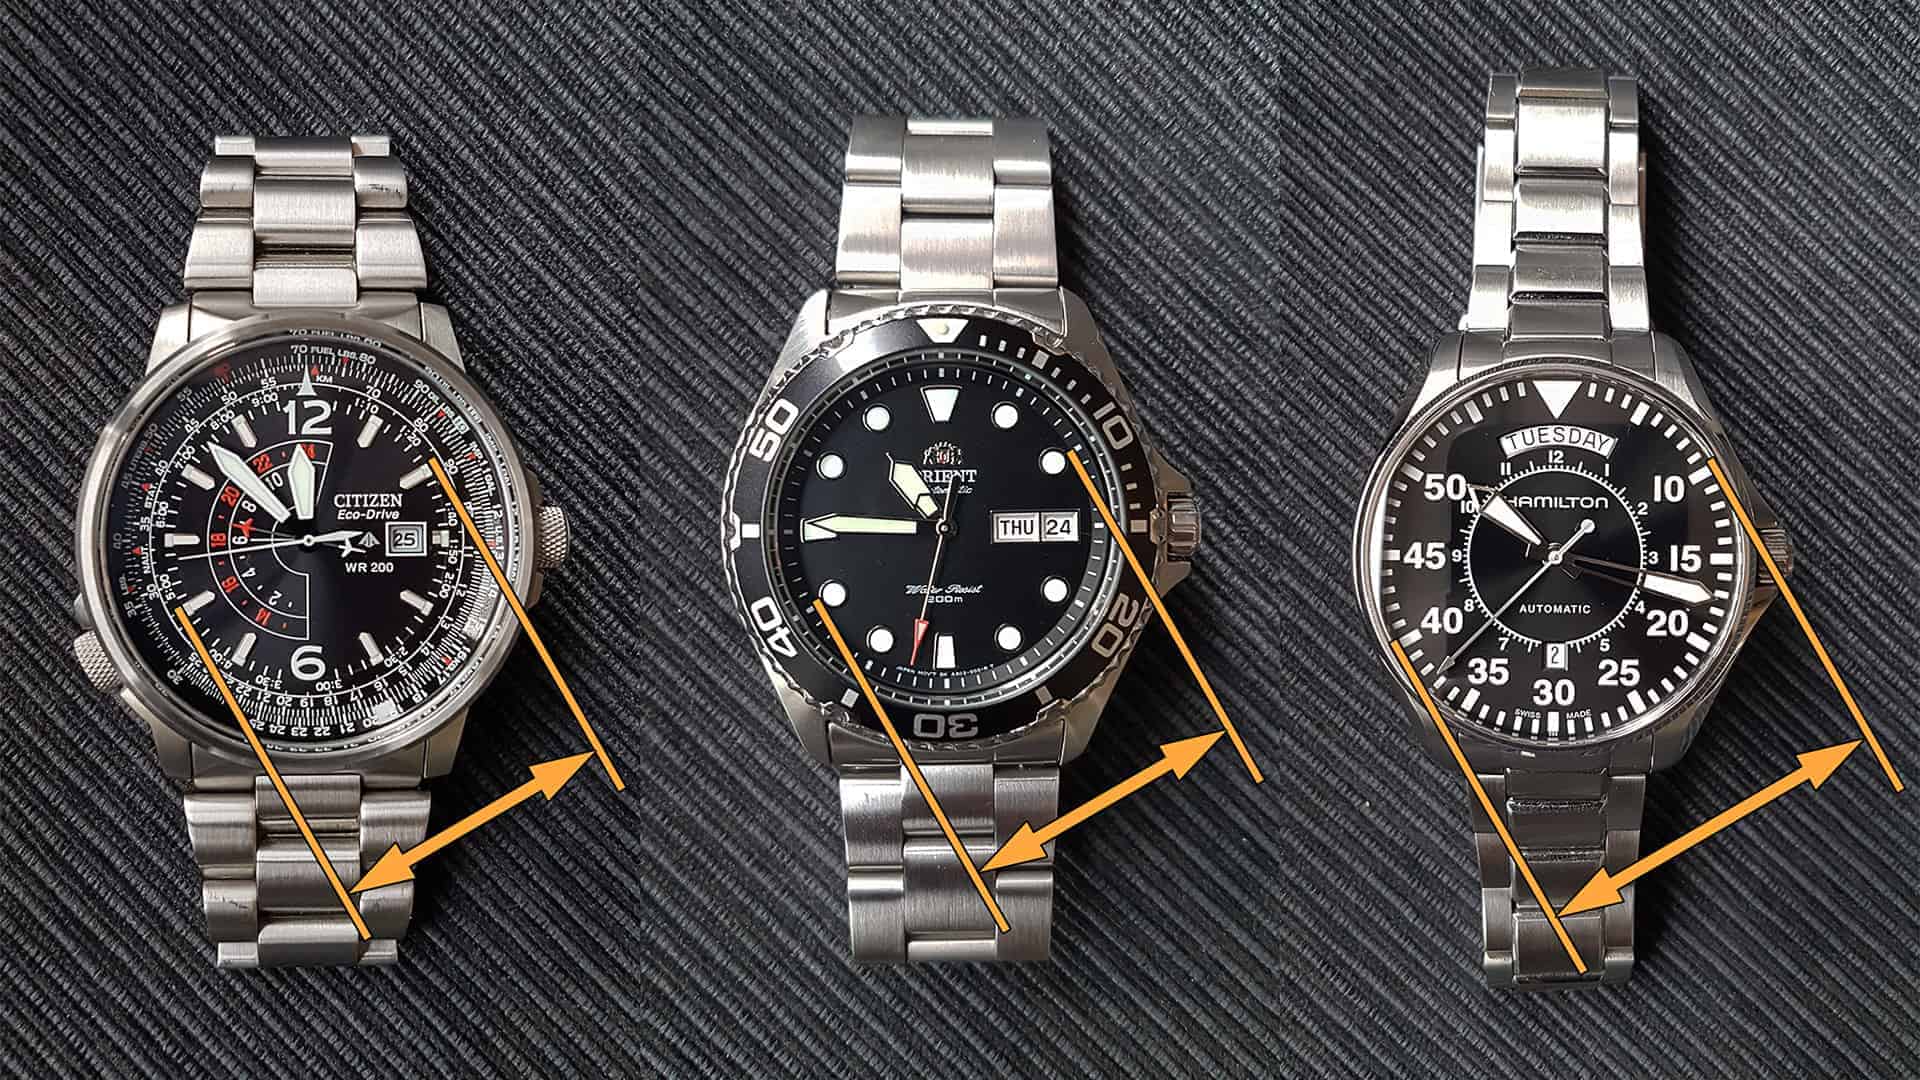 Watch Sizes vs. Wrist Sizes: What's the Right Size for You? | Teddy  Baldassarre